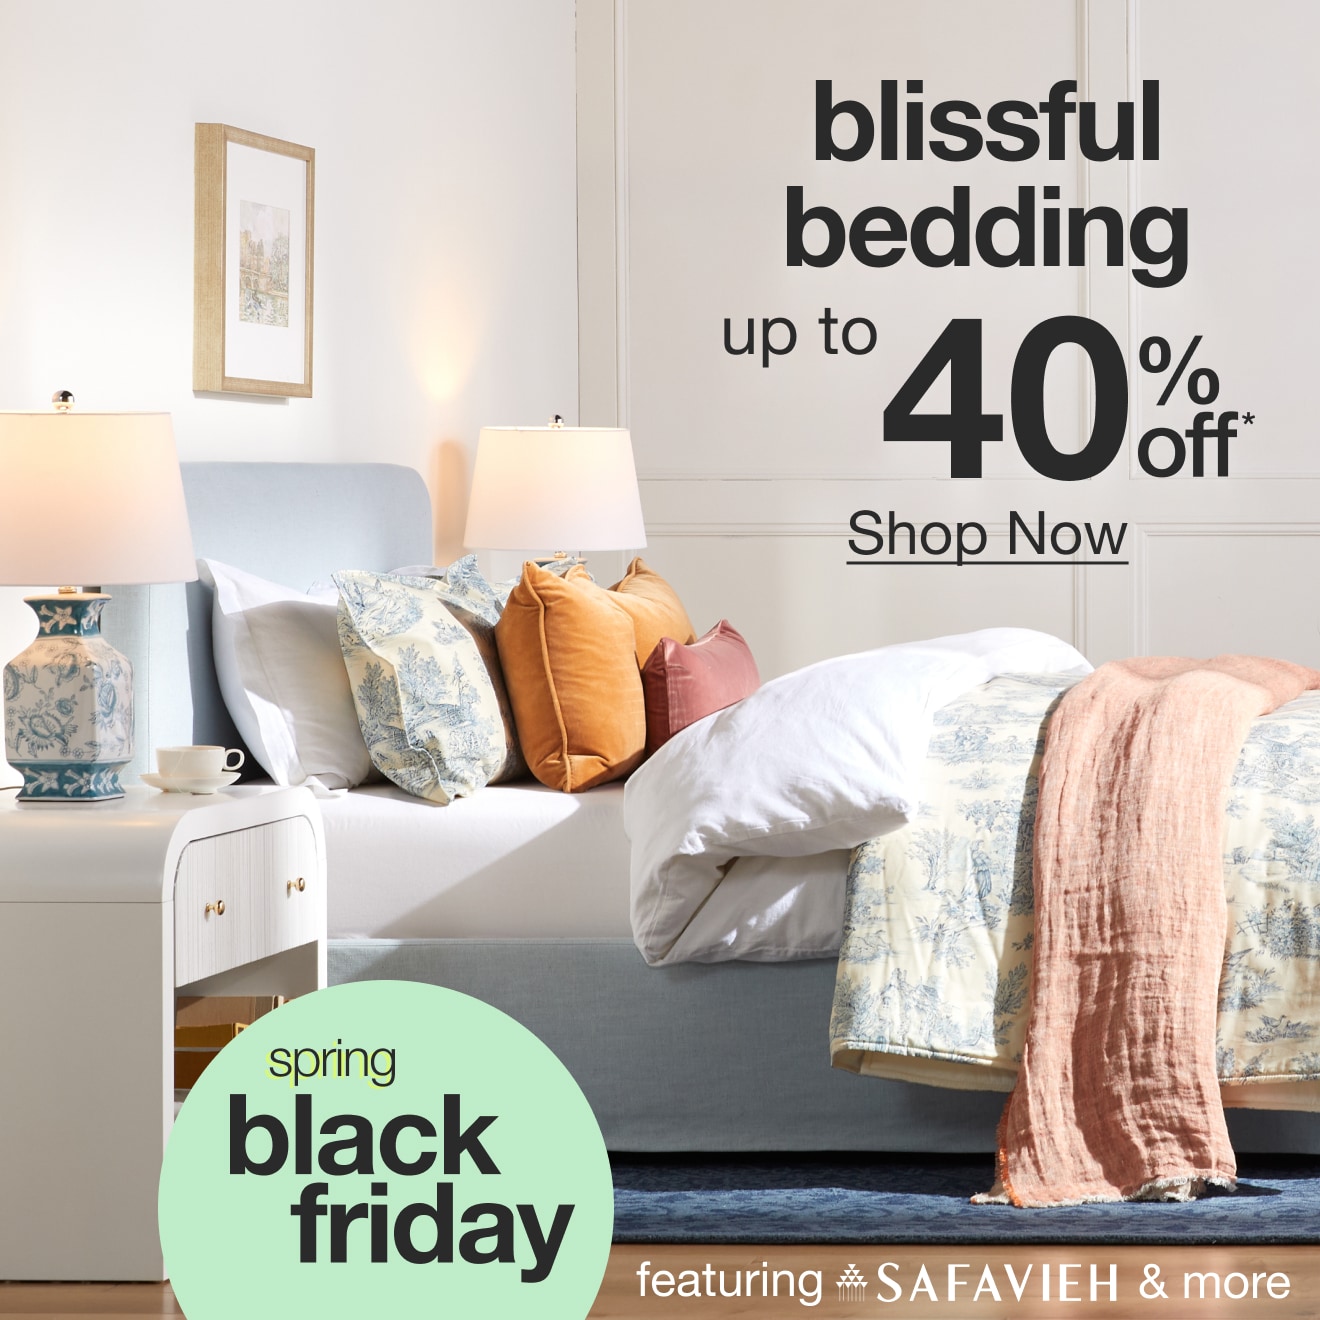 Blissful Bedding Up to 40% Off* — Shop Now!